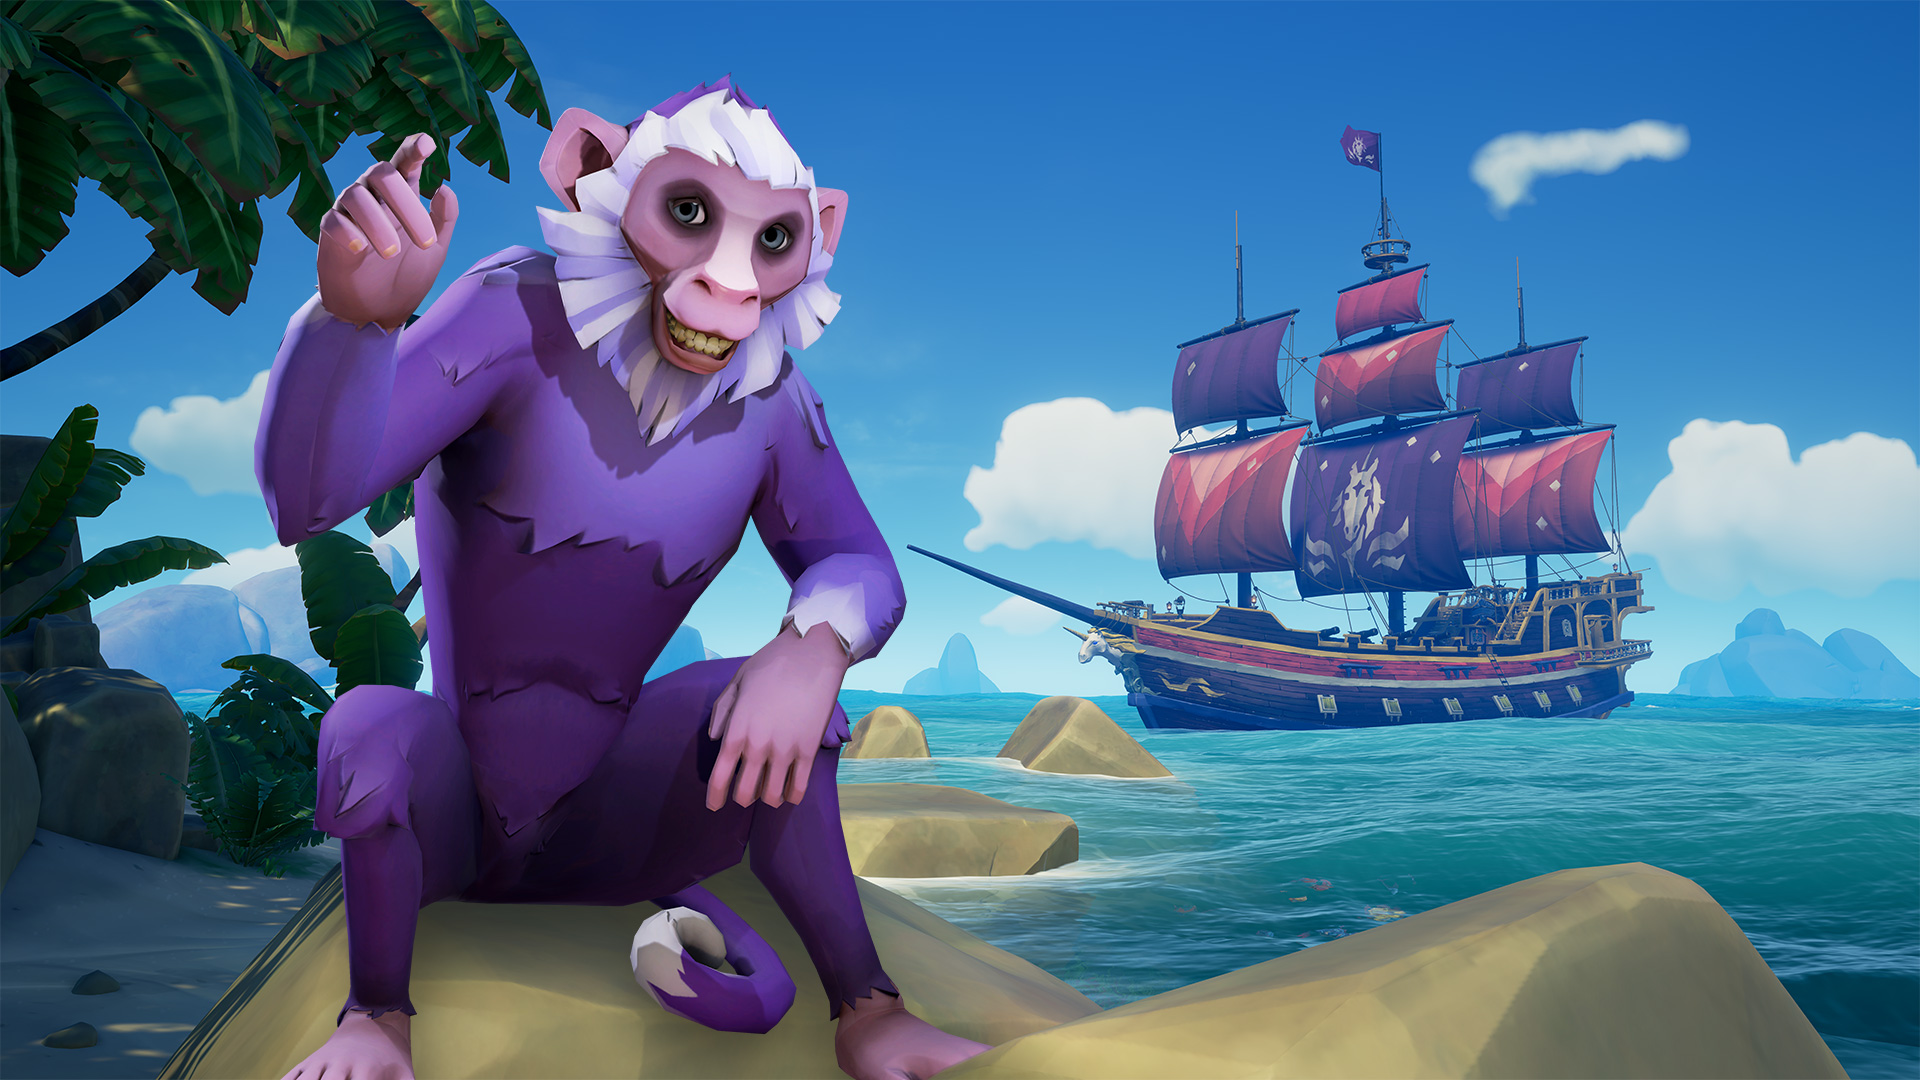 download sea of thieves pc with game pass not using microsoft store